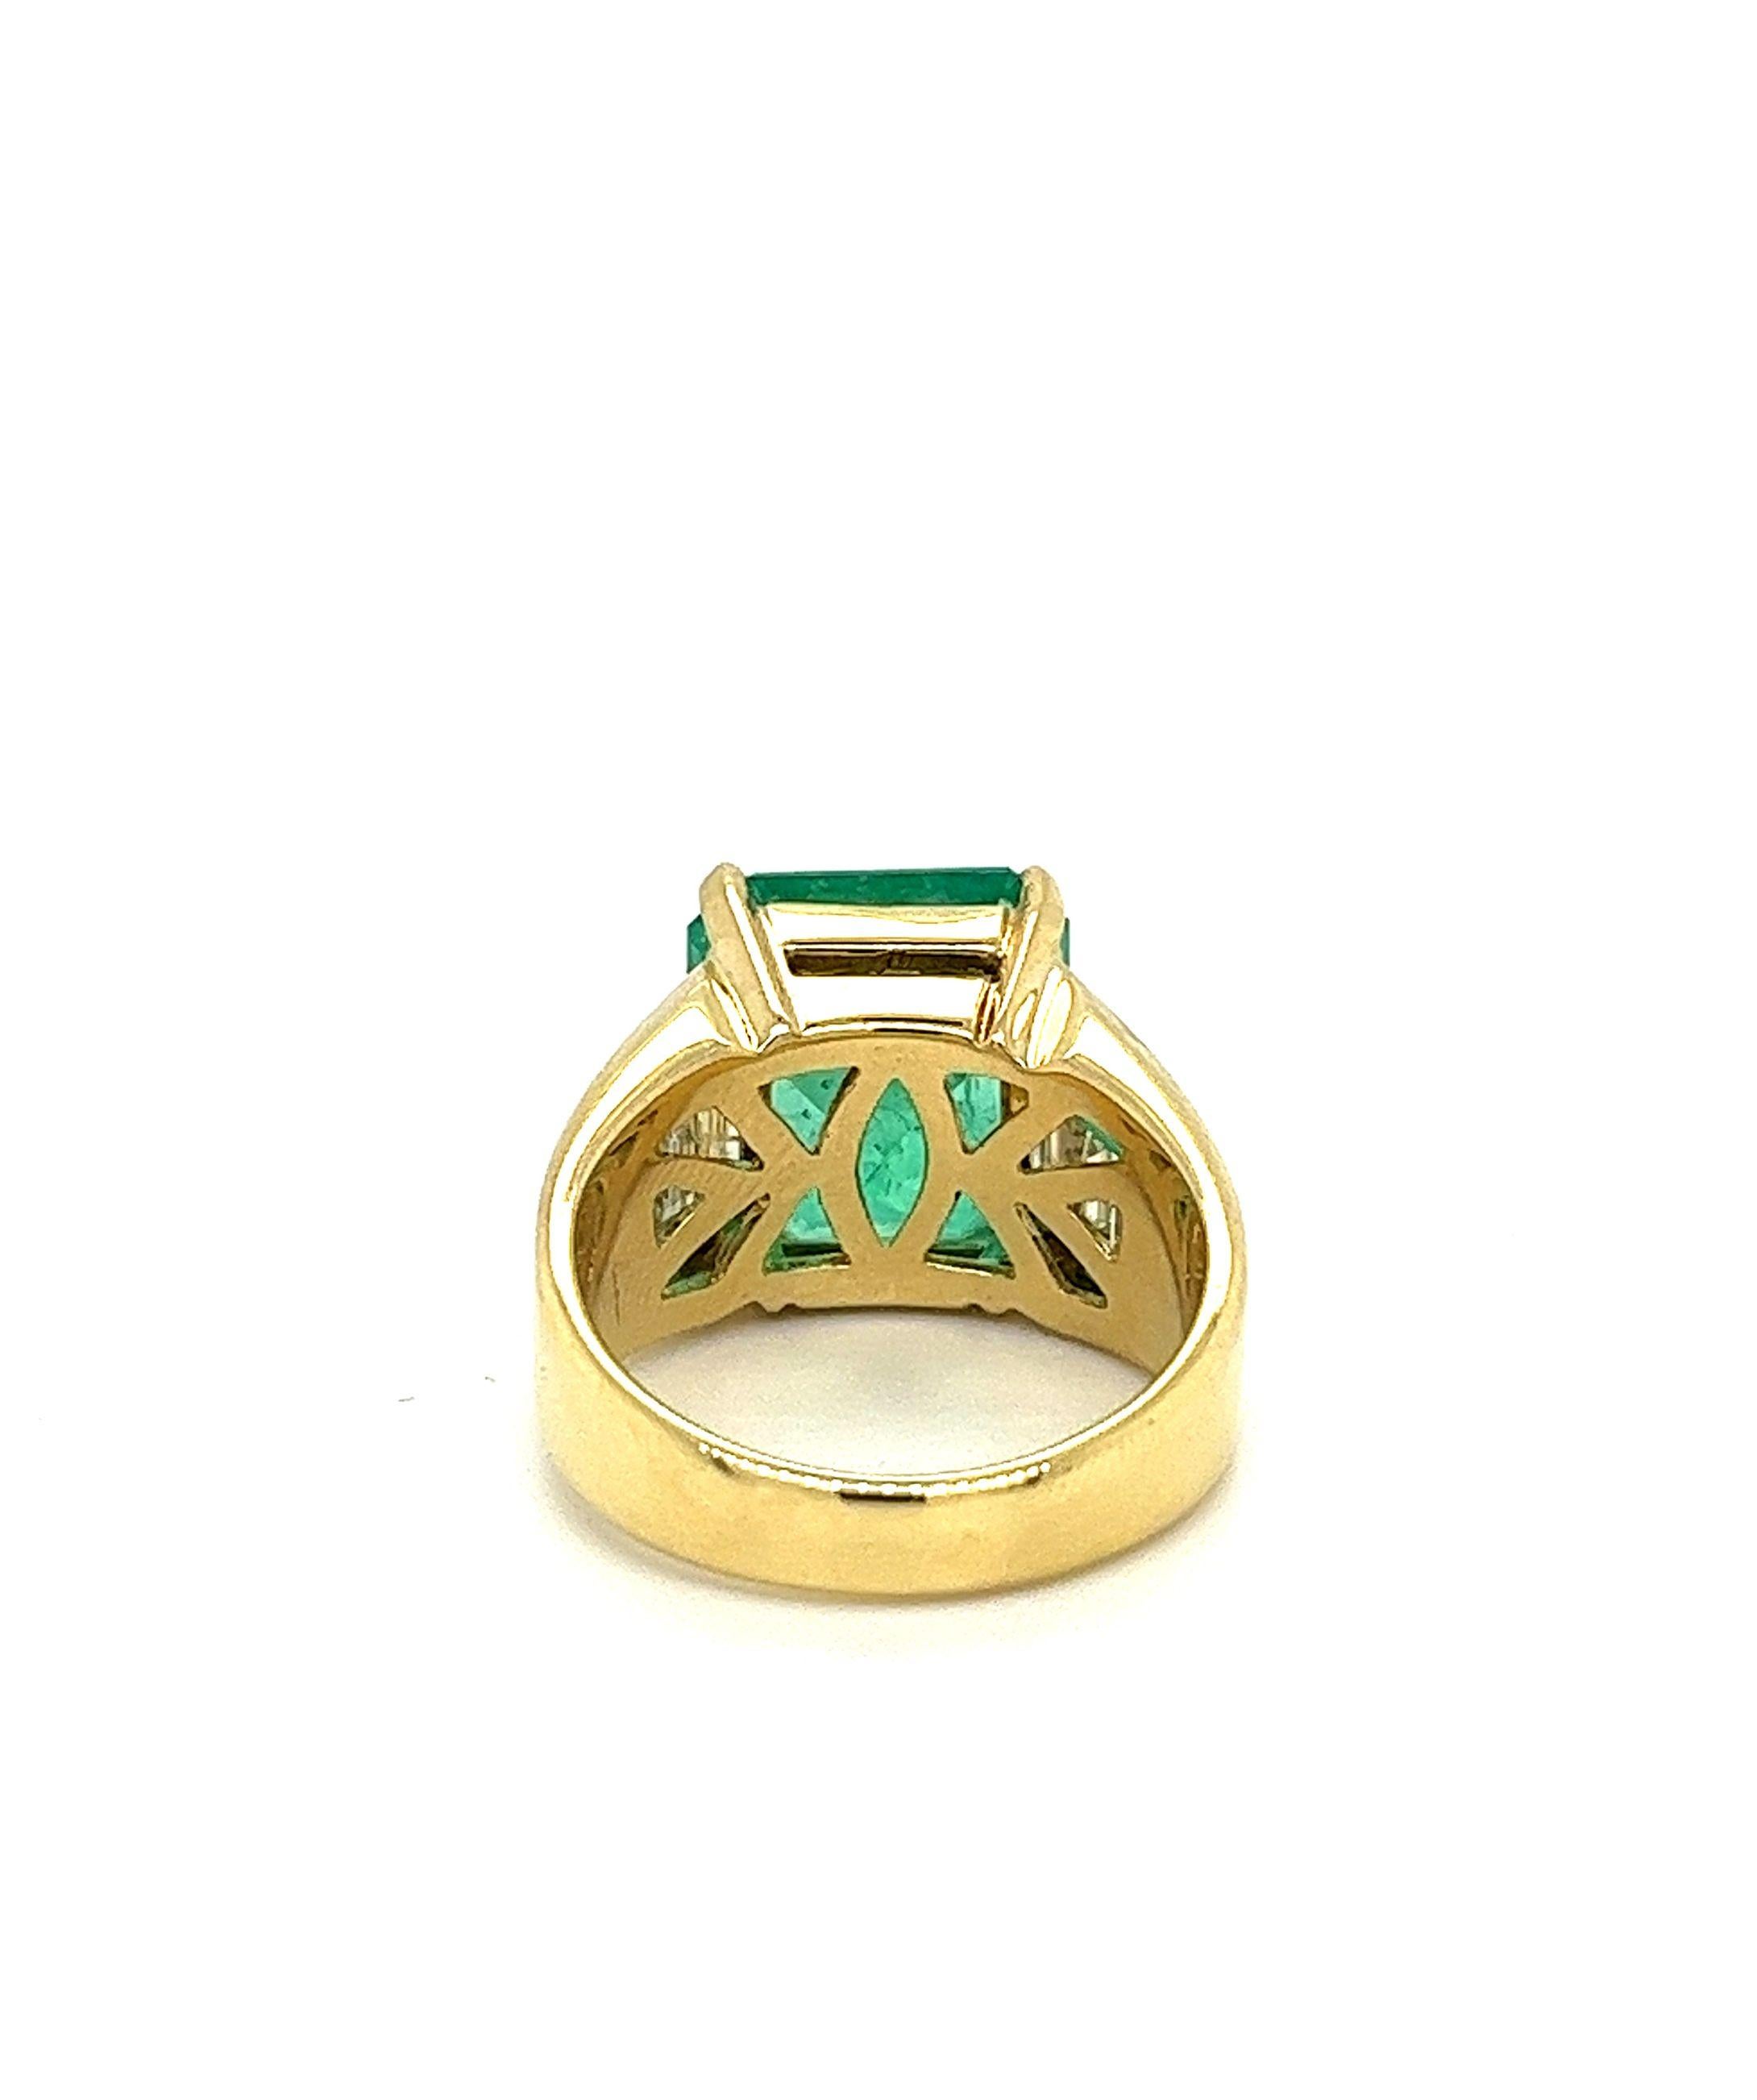 GIA Certified 8.64 Carat Colombian Emerald & Baguette Diamond Ring in 18K Gold  For Sale 1